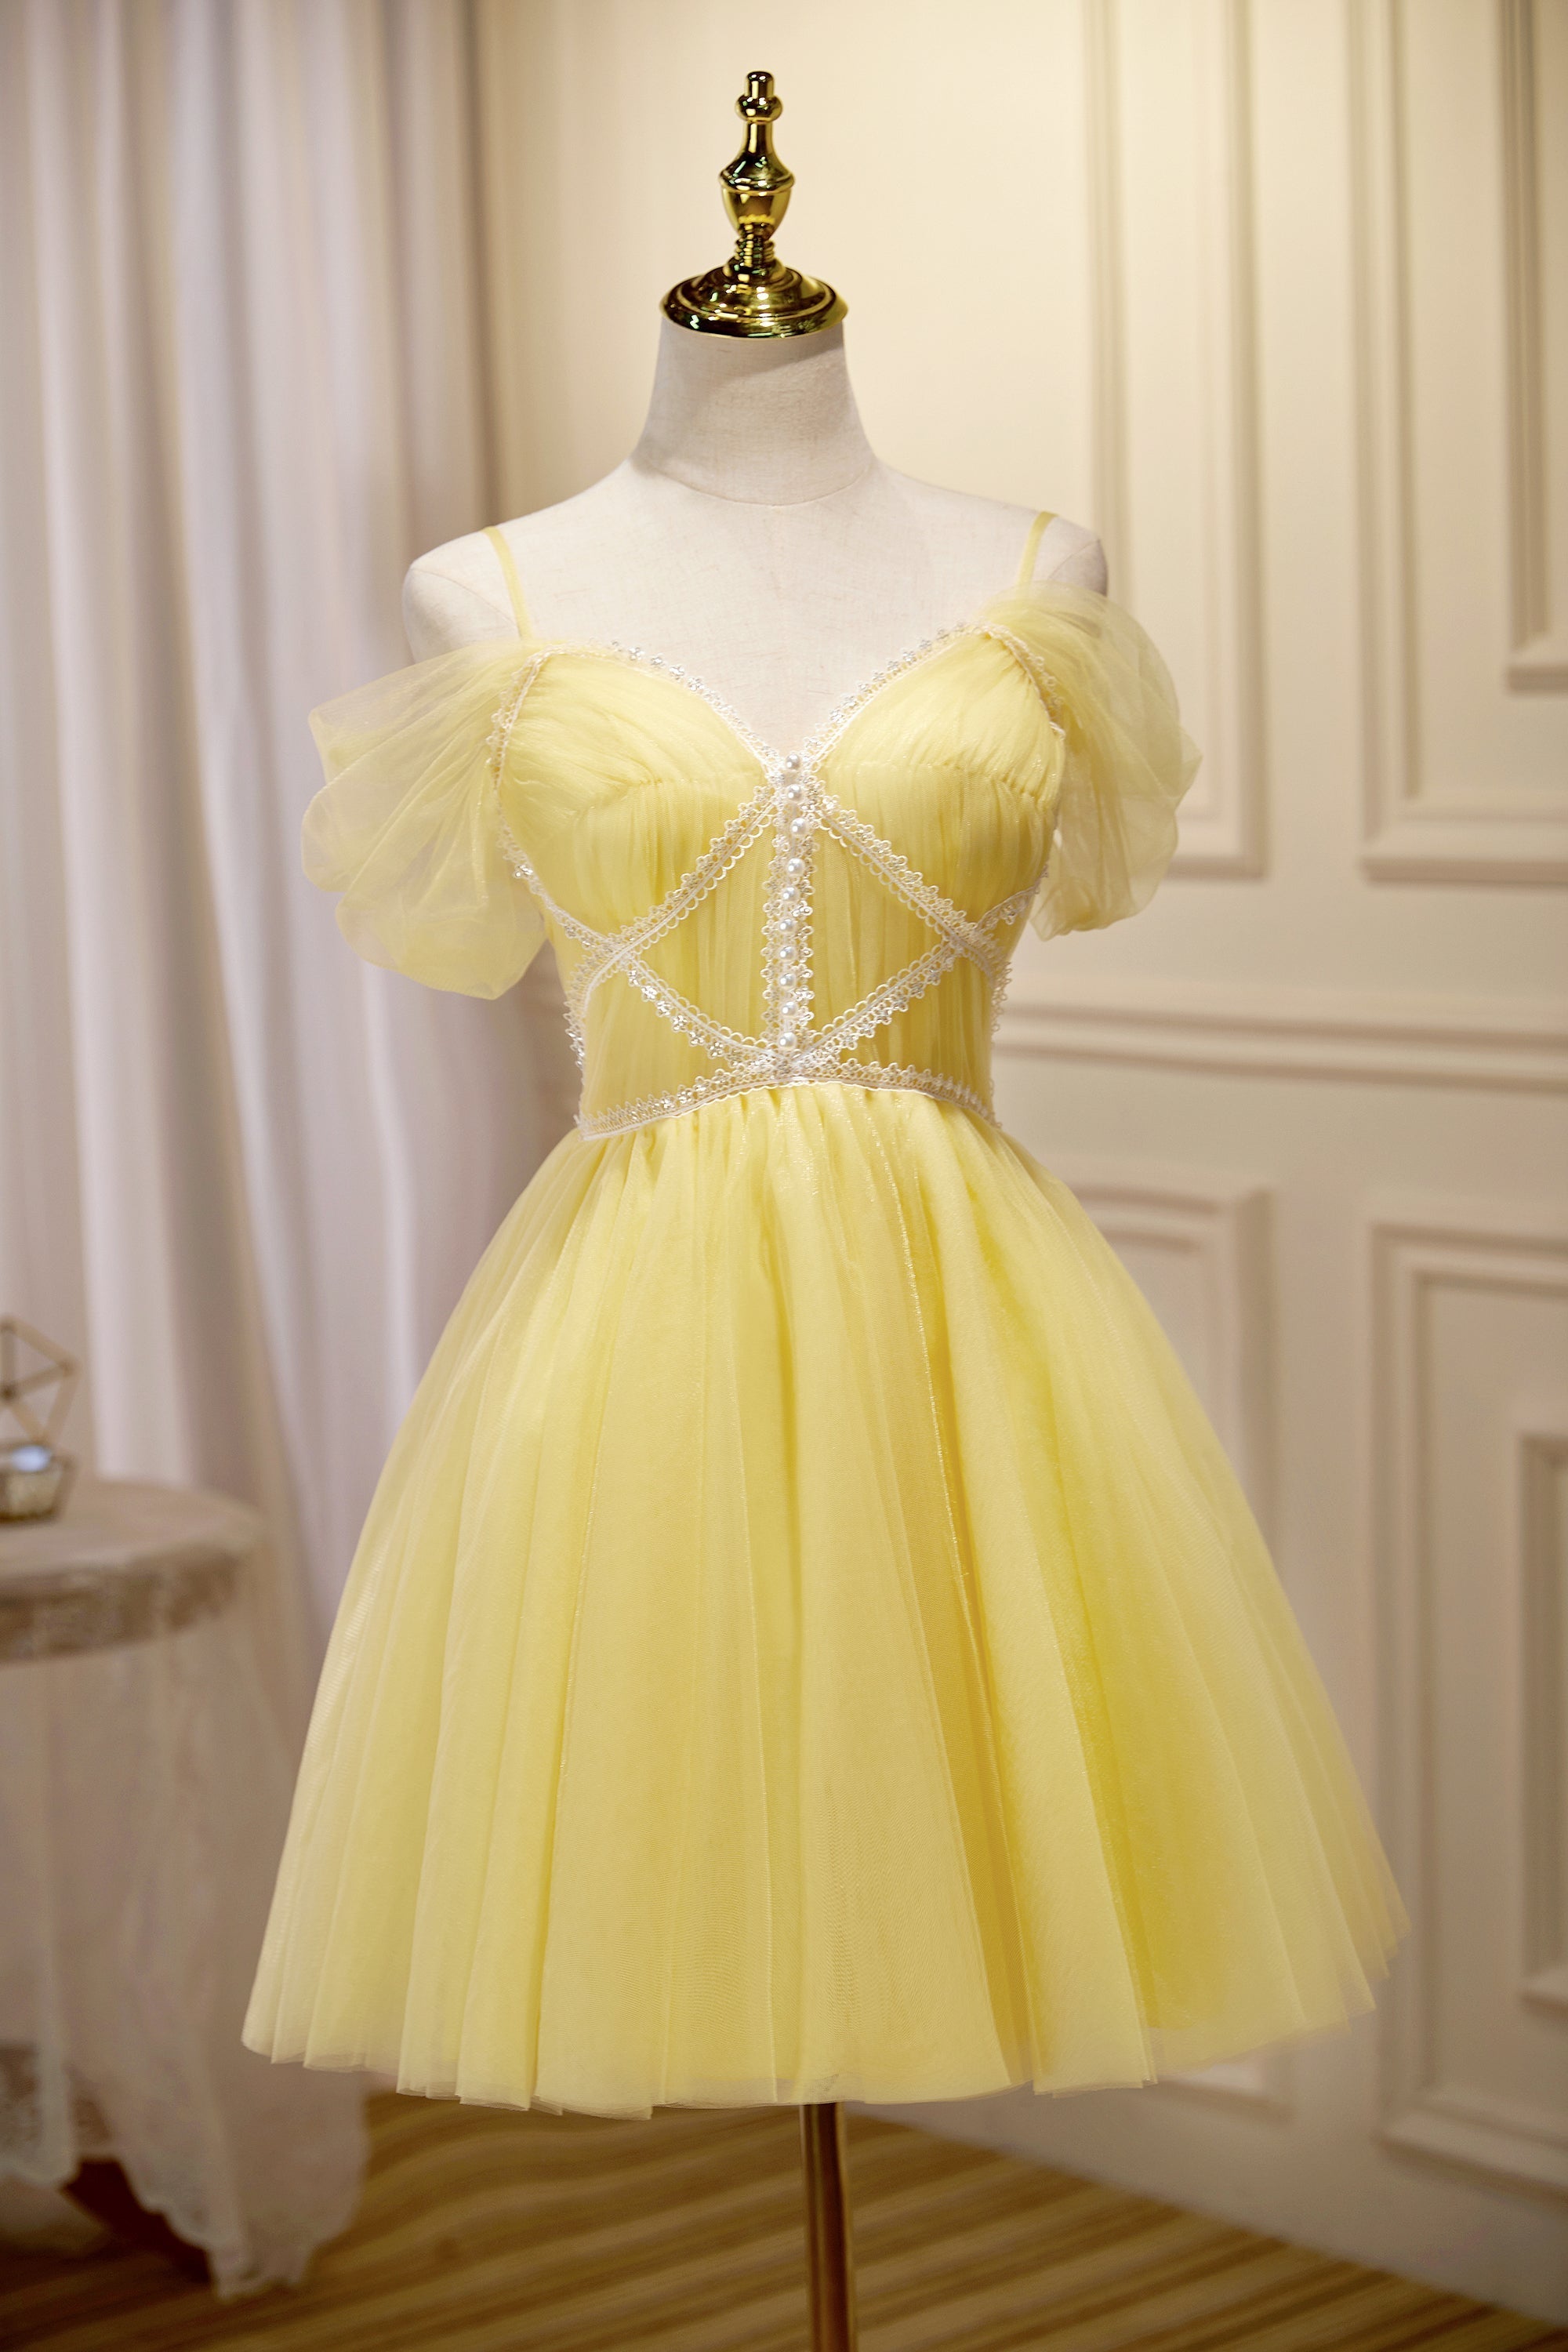 Bridesmaids Dresses Ideas, Cute Yellow Spaghetti Straps Off The Shoulder Tulle Short Homecoming Dresses